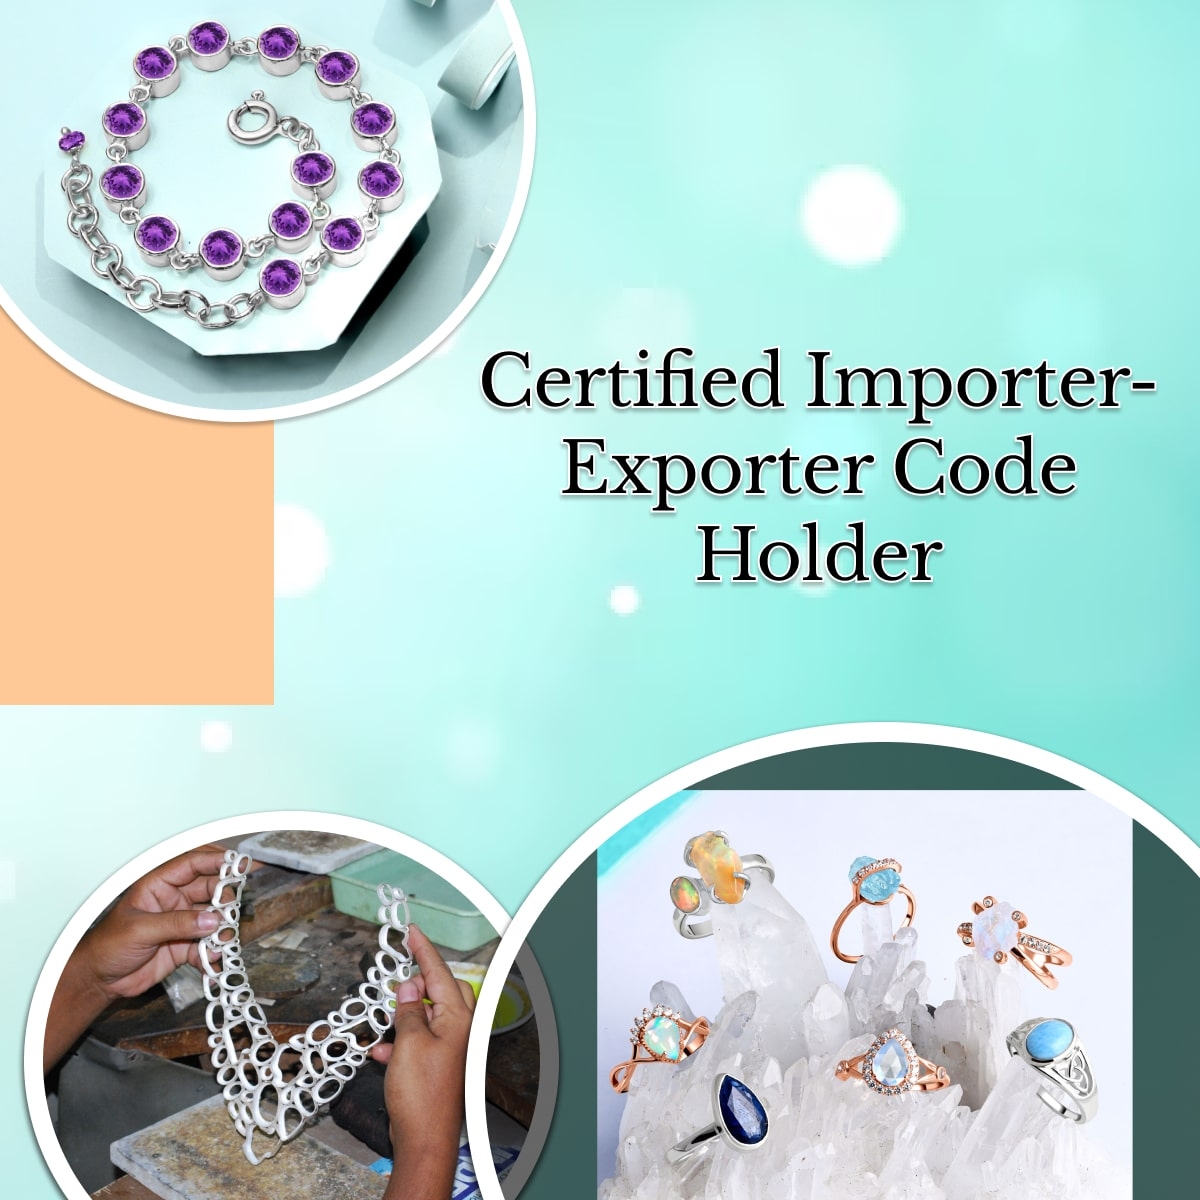 Accredited with Certificate of Importer-Exporter Code